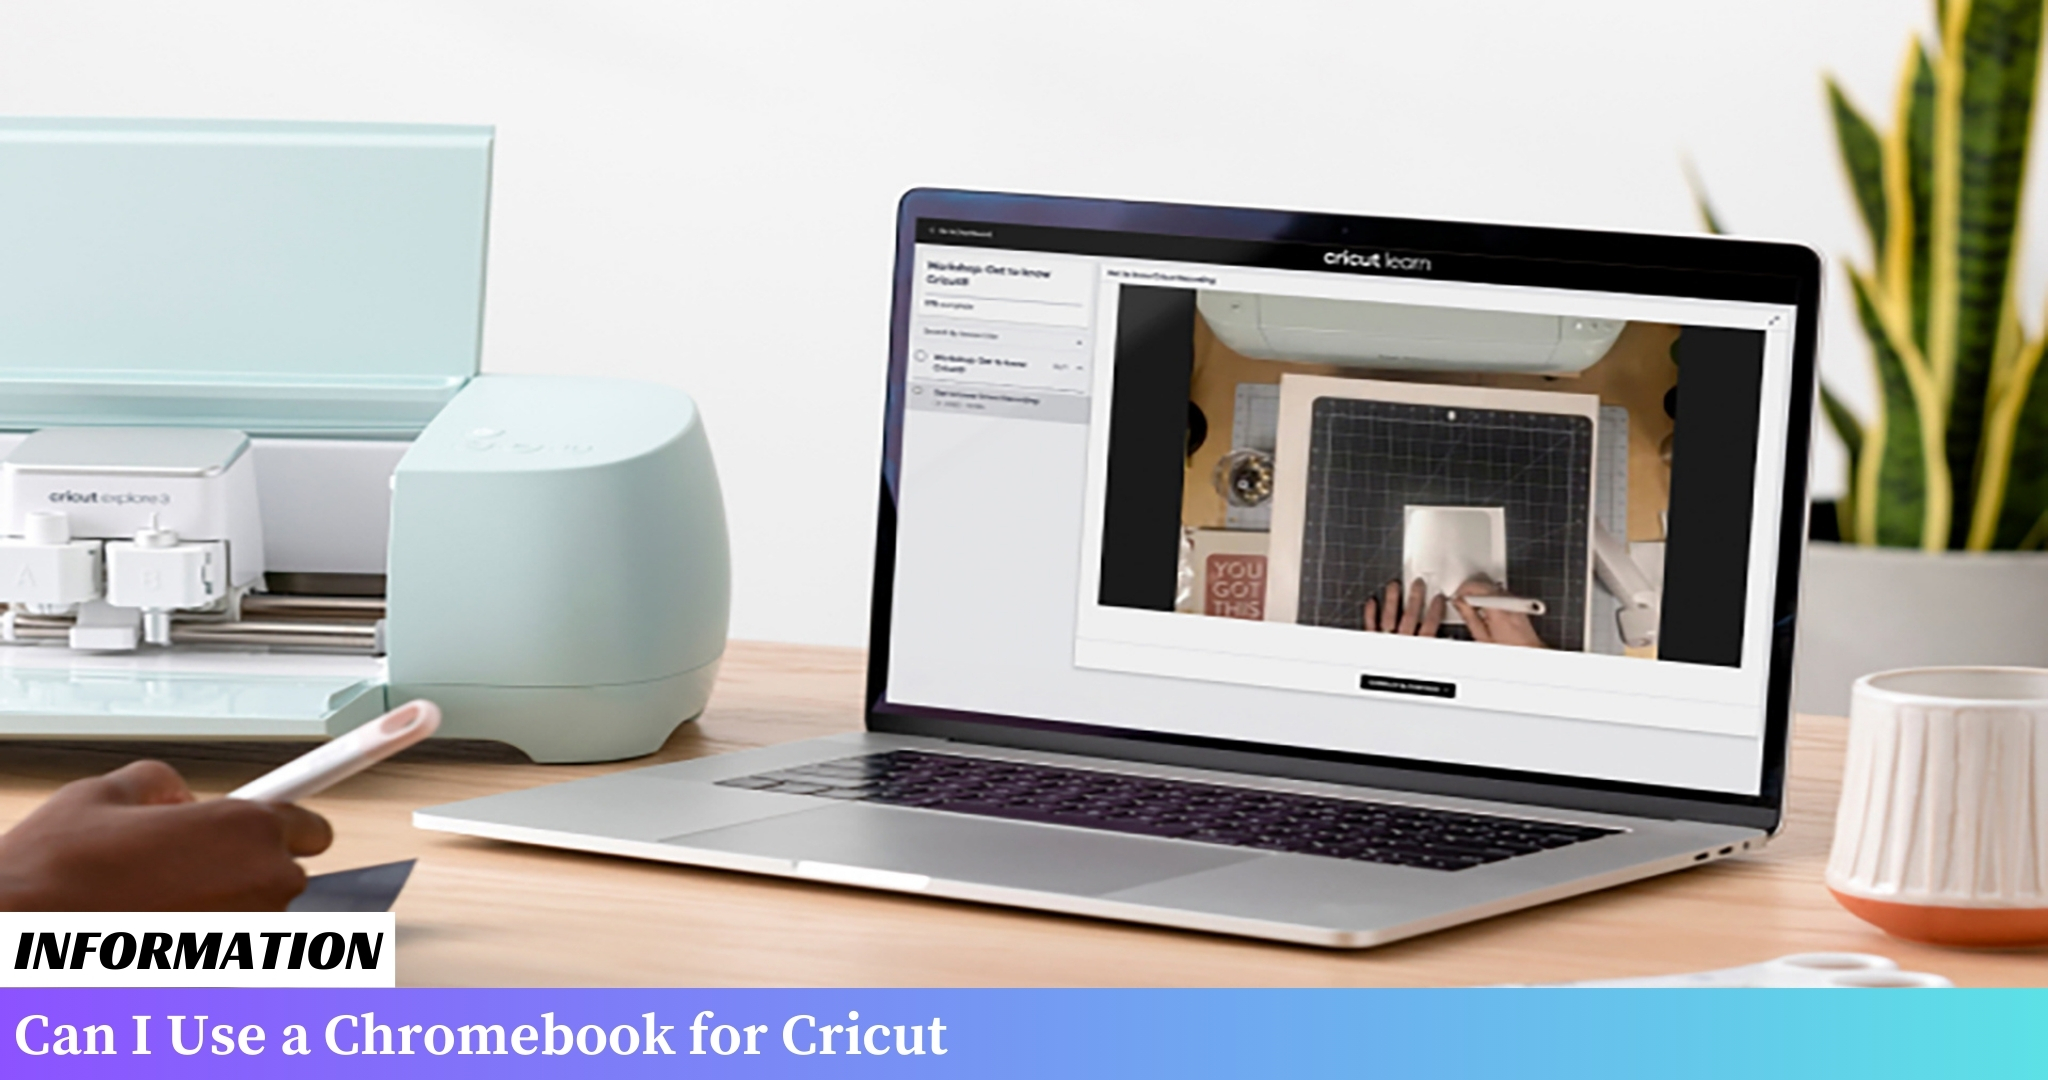 A step-by-step guide on using Cricut for Cricut. Learn how to maximize the potential of your Cricut machine efficiently.